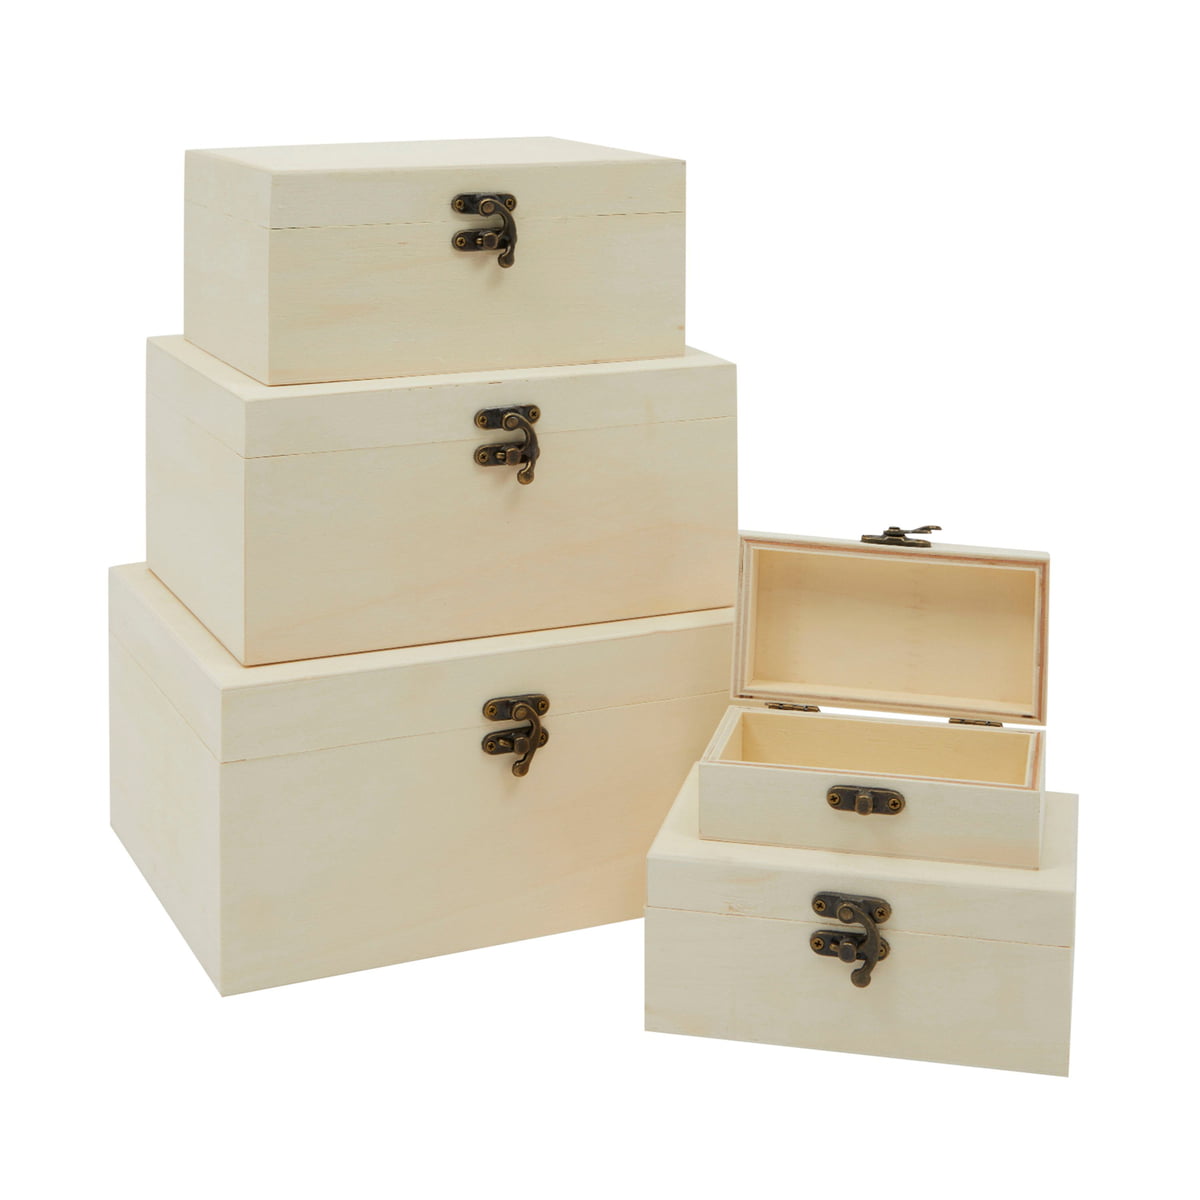 Portable Heart Wooden Chest Jewelry Box for Color Arts Crafts Home Decor 